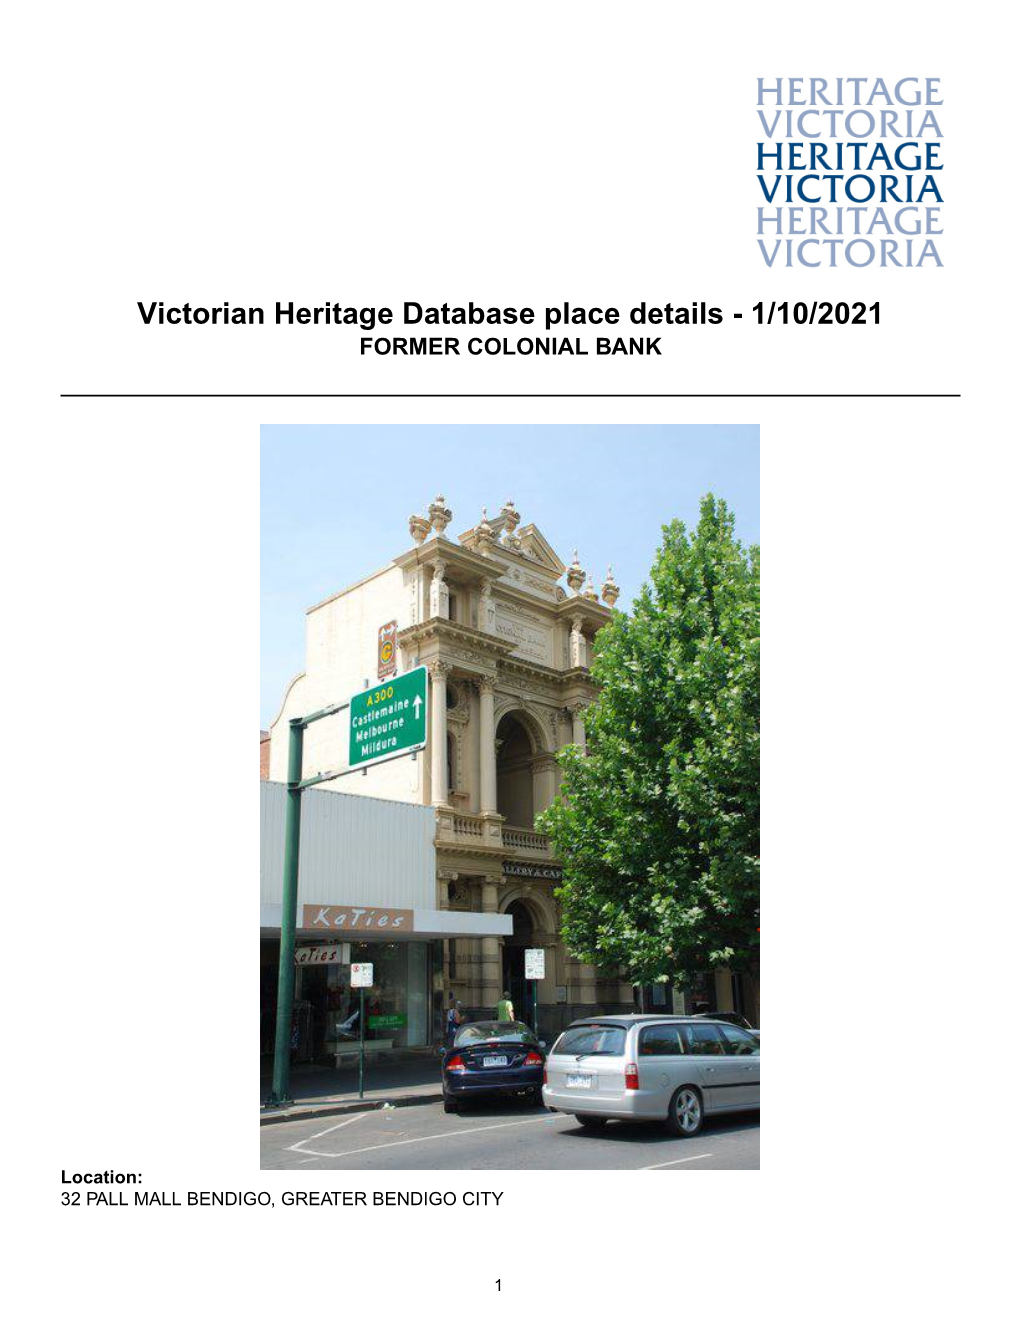 Victorian Heritage Database Place Details - 1/10/2021 FORMER COLONIAL BANK